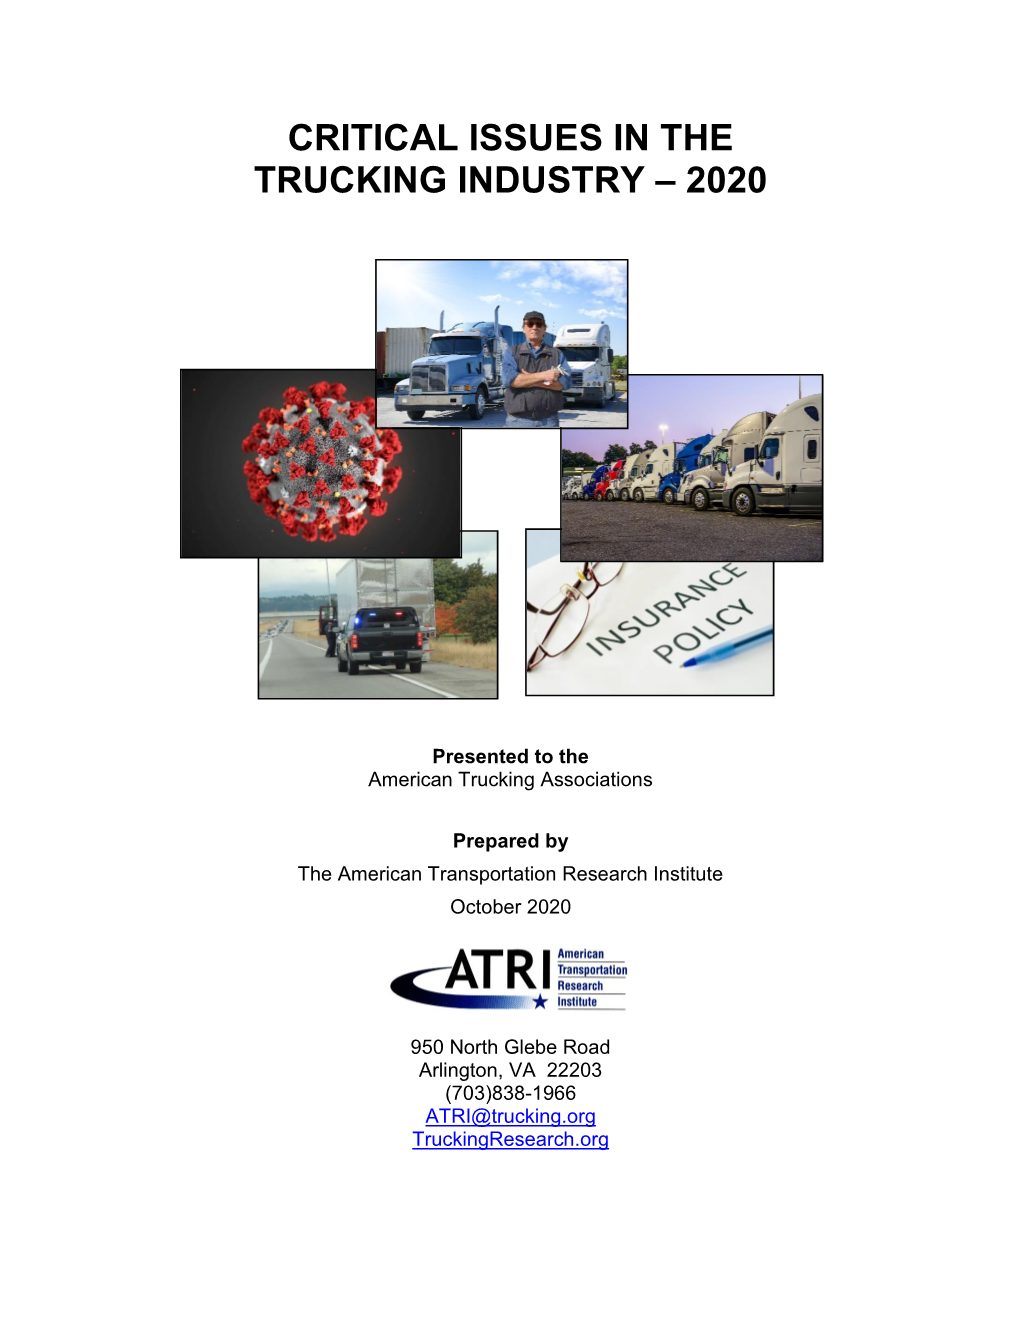 Critical Issues in the Trucking Industry – 2020